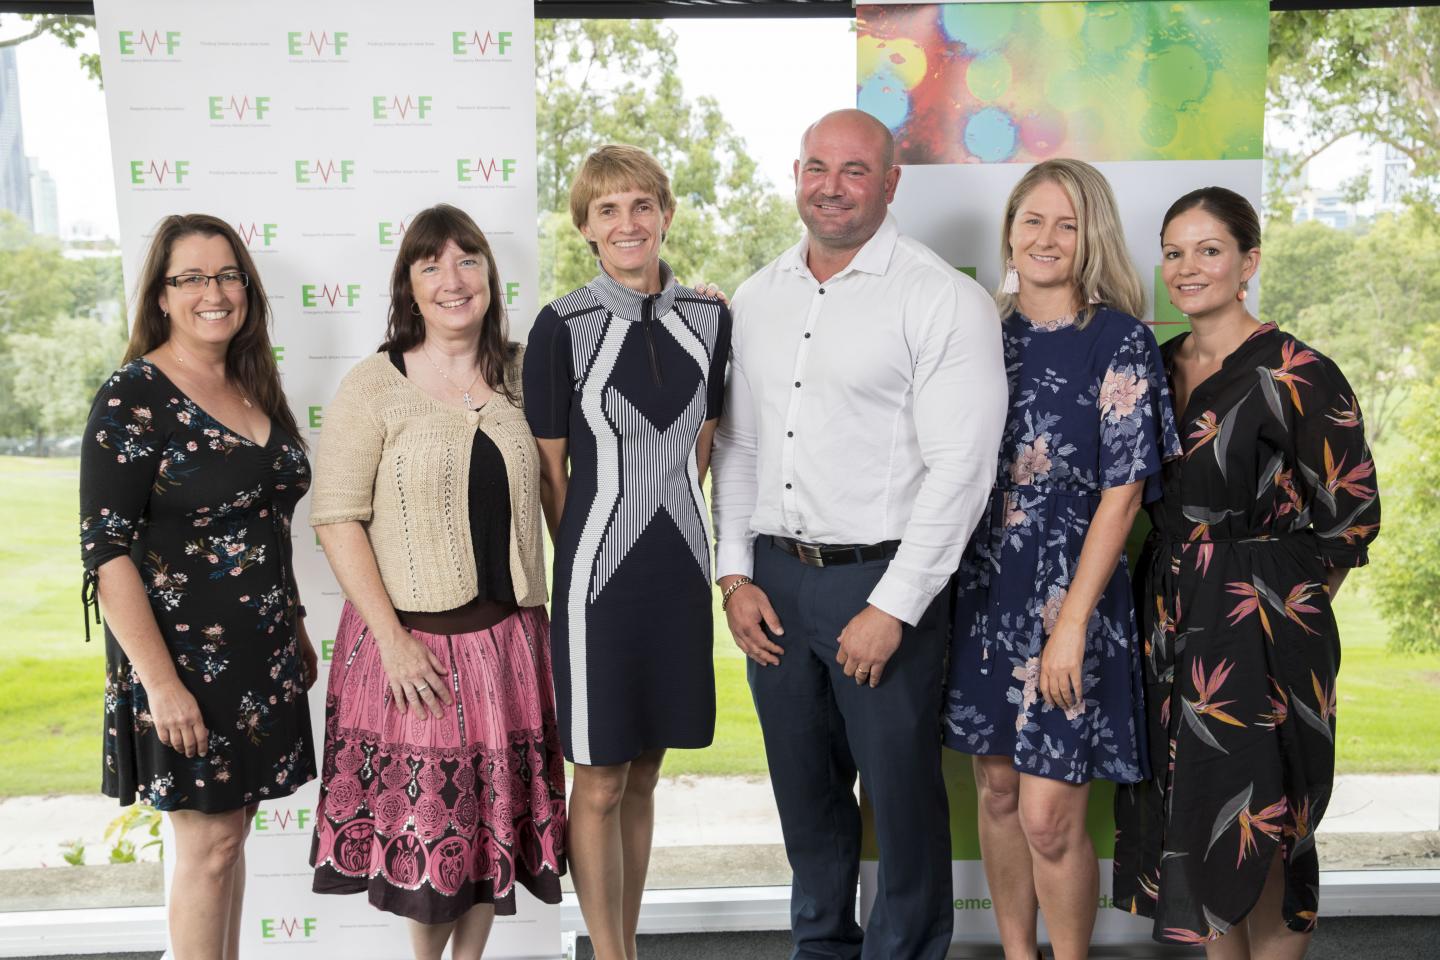 EMF's Research Support Network Team Involved in the Pilot